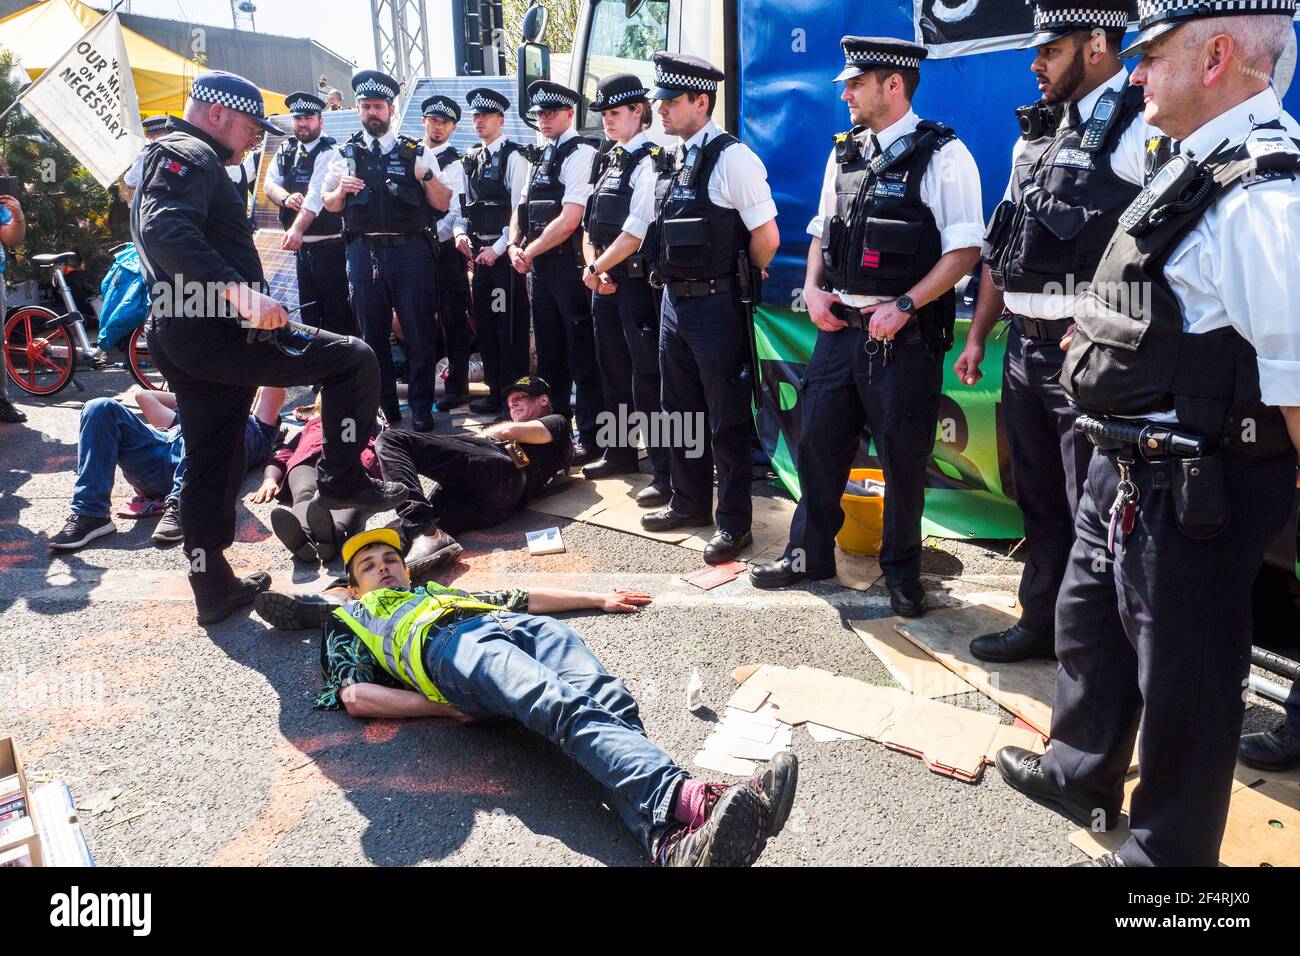 London, UK. 20th April 2019. Waterloo bridge has been blocked by climate change campaigners from Extinction Rebellion for six days. During that time, they have created a Garden bridge used for International Rebellion activities to demand urgent action to combat climate change by the British government Stock Photo